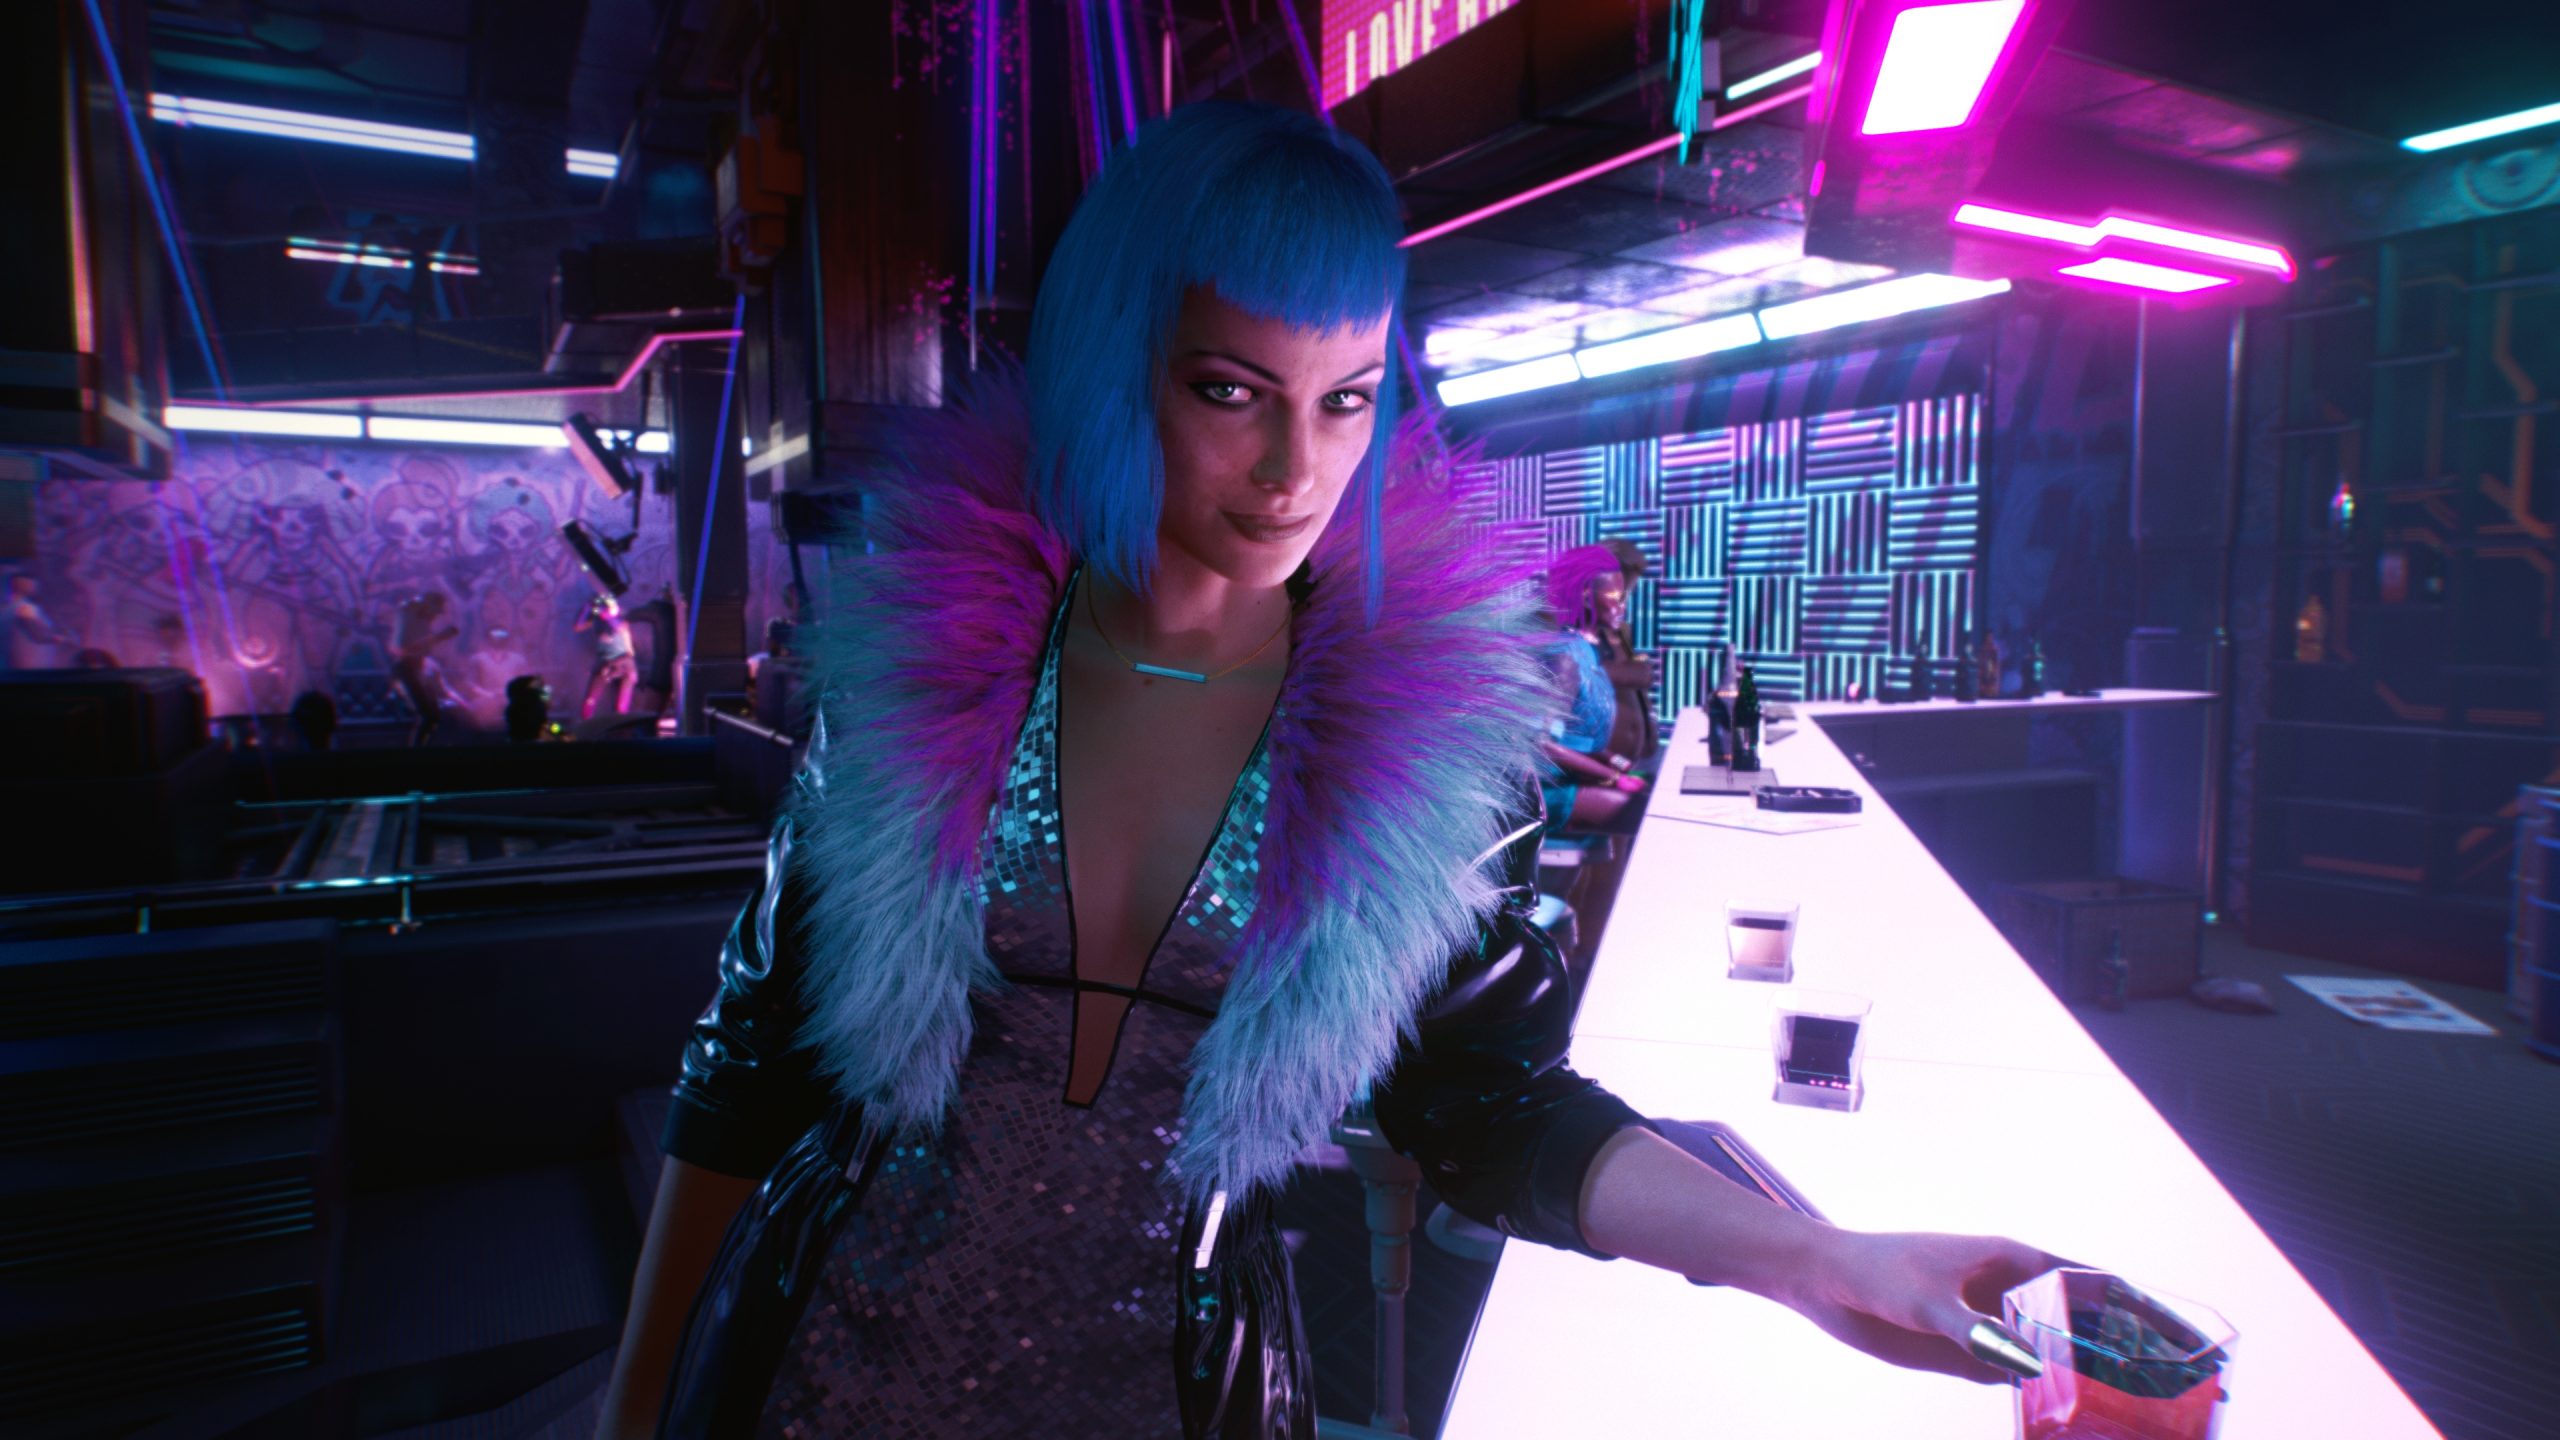 Cyberpunk 2077 new trailer showcases the world, characters, and more